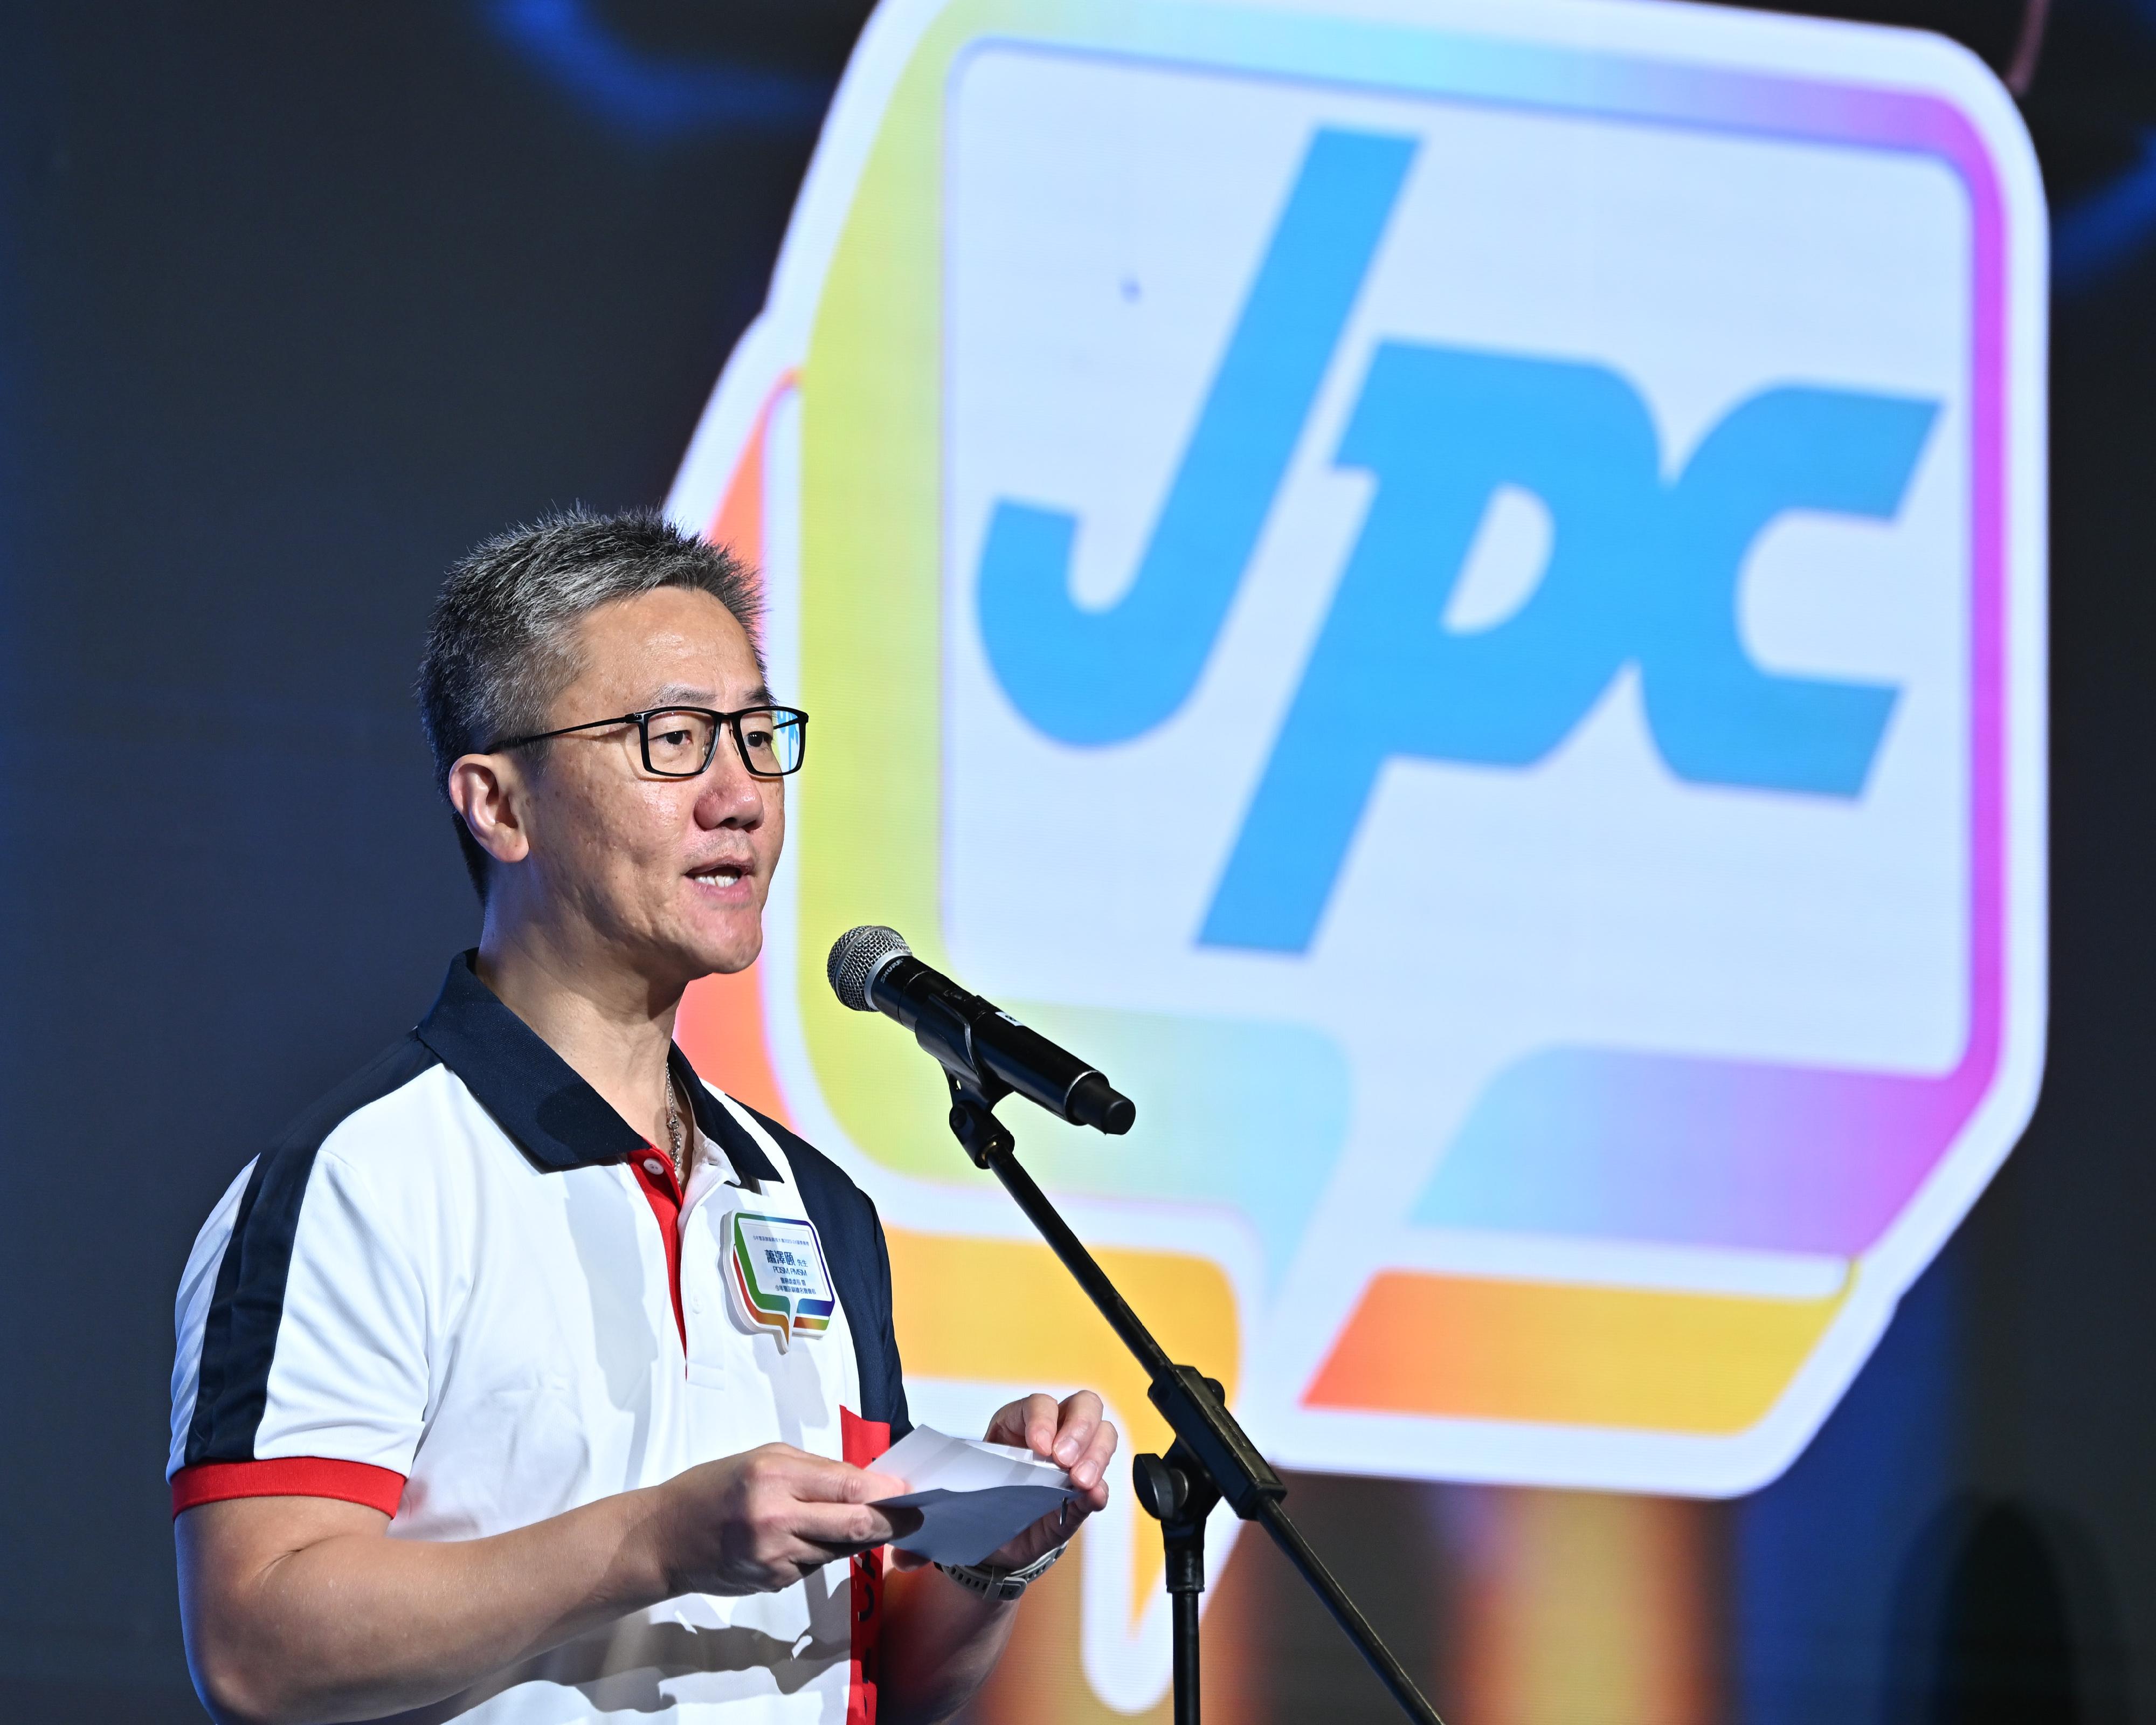 The Commissioner of Police, Mr Siu Chak-yee, delivers a welcome speech at the award presentation ceremony of the JPC Innovation and Technology Competition 2023-24 today (May 11).